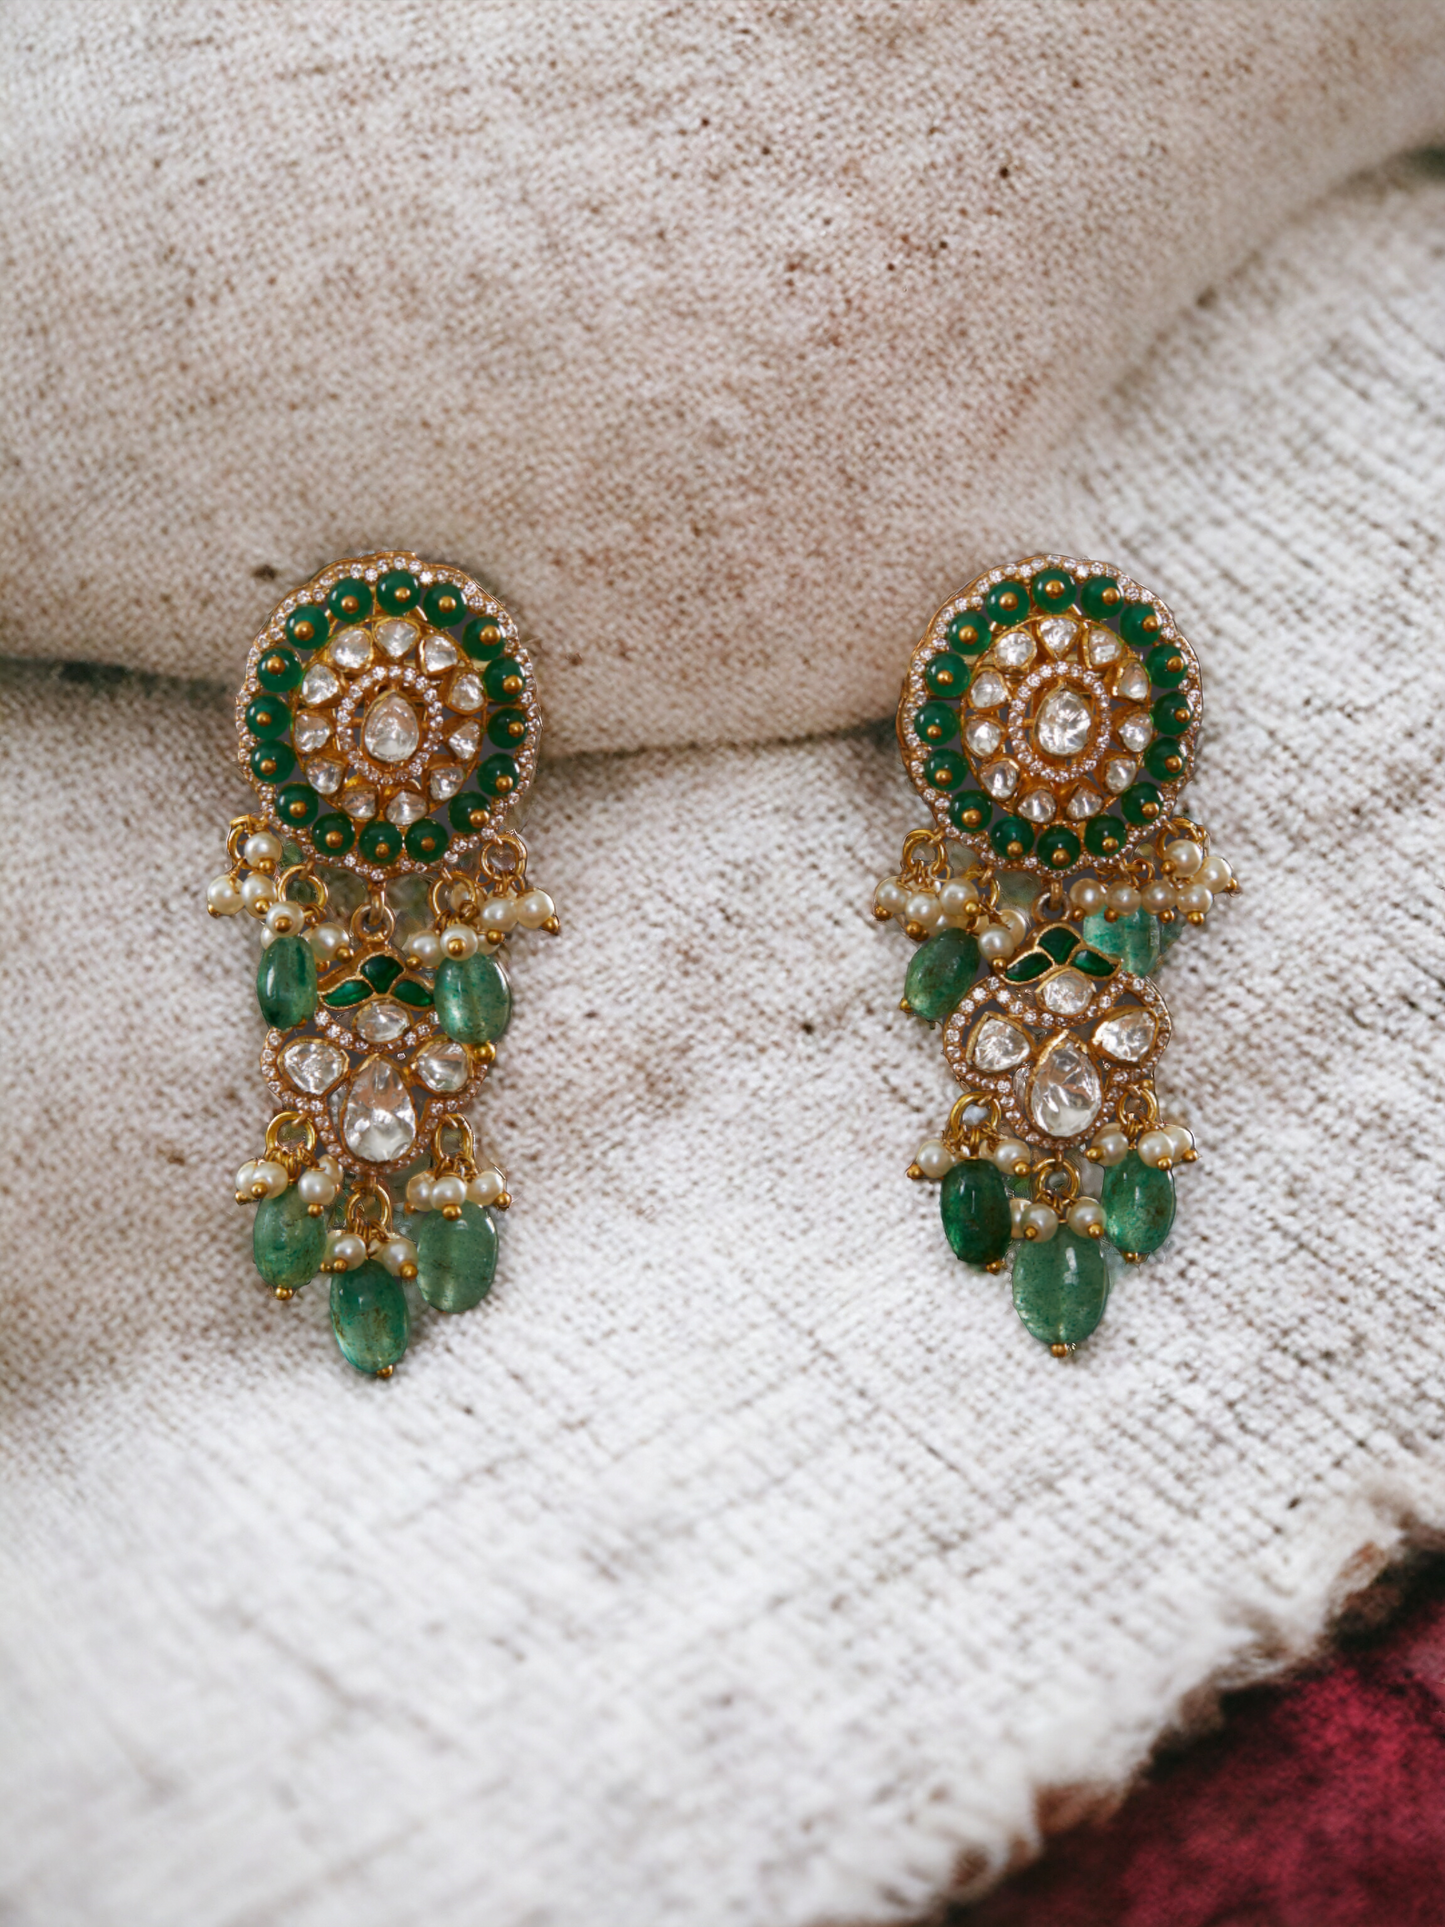 Vellore polki oval motif dangler earrings with green beads and drops.